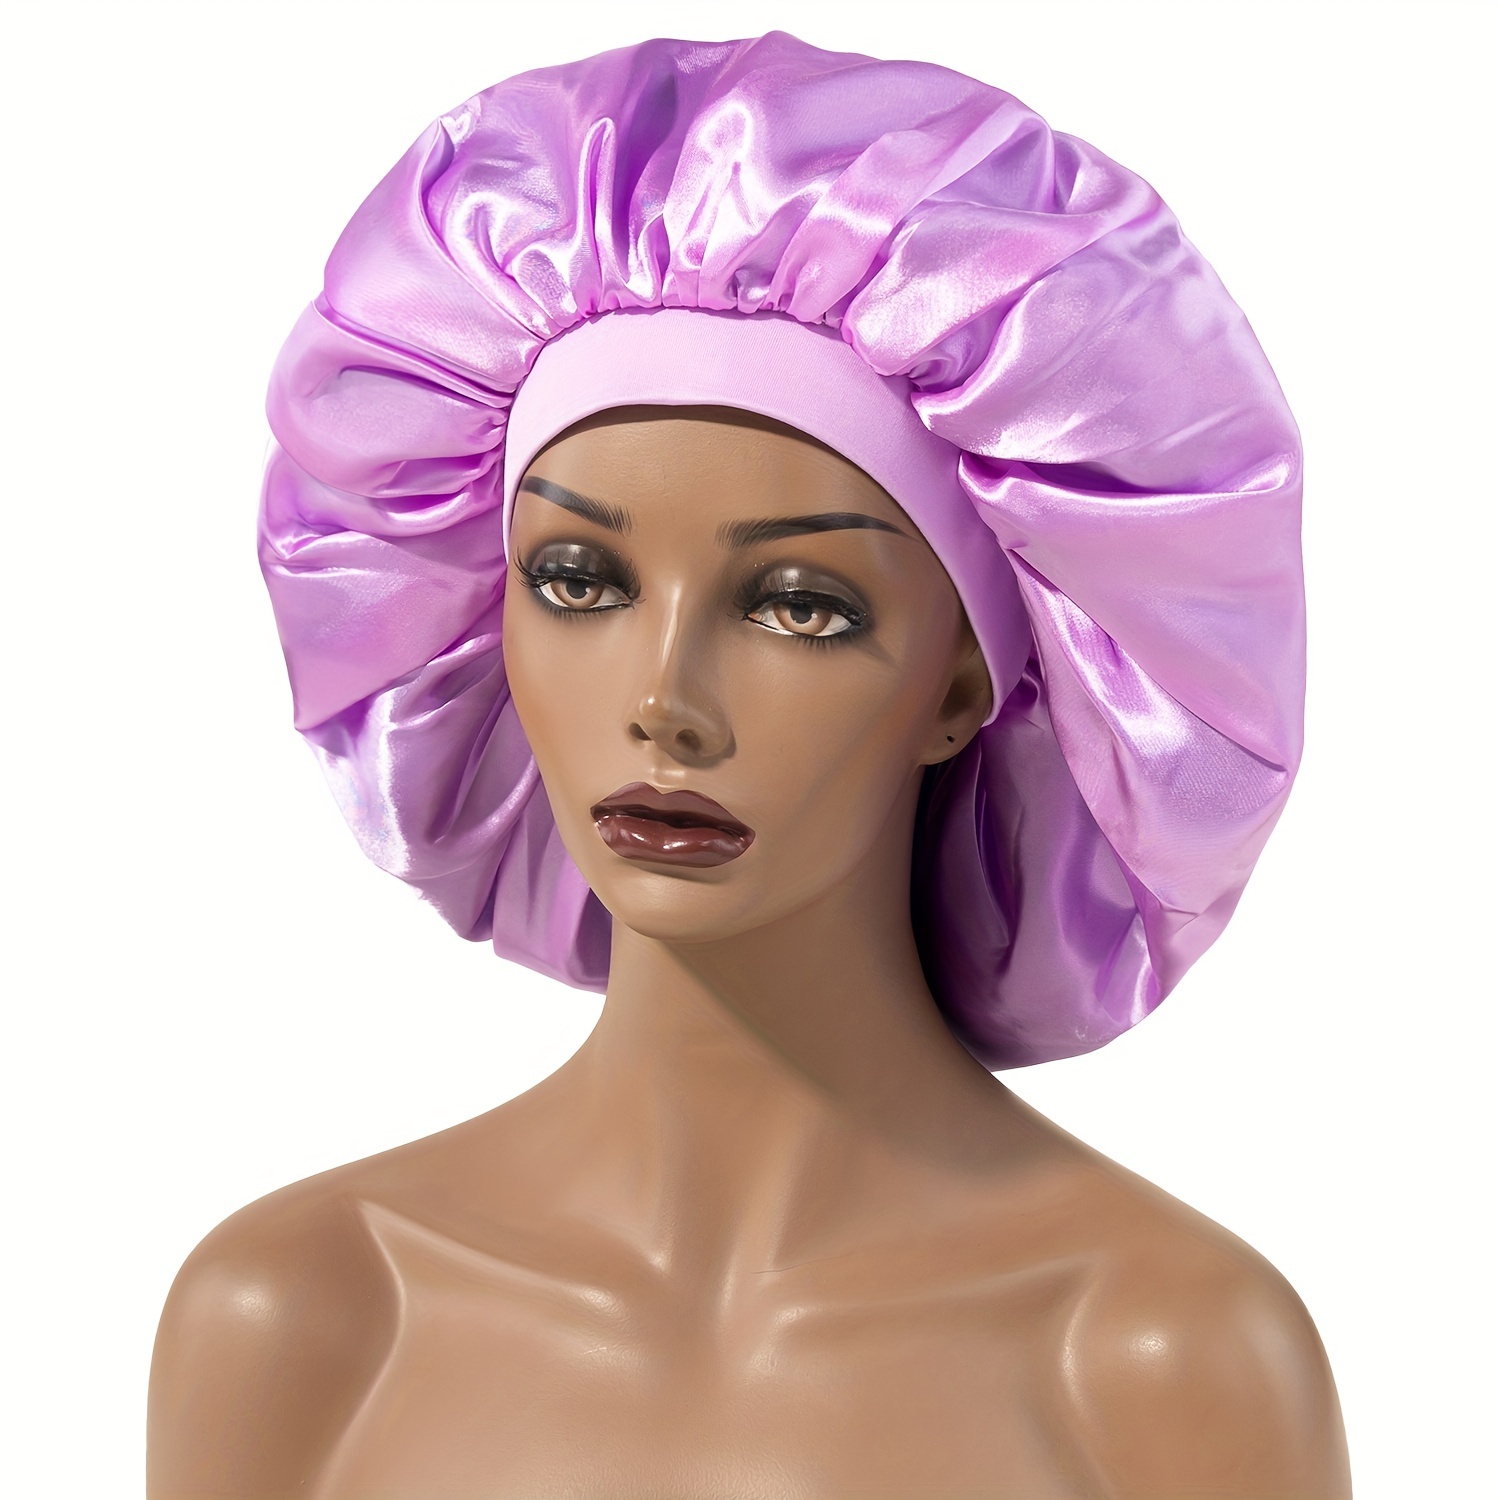 Satin Bonnet Women Large Size Curly Long Hair Protects Hair